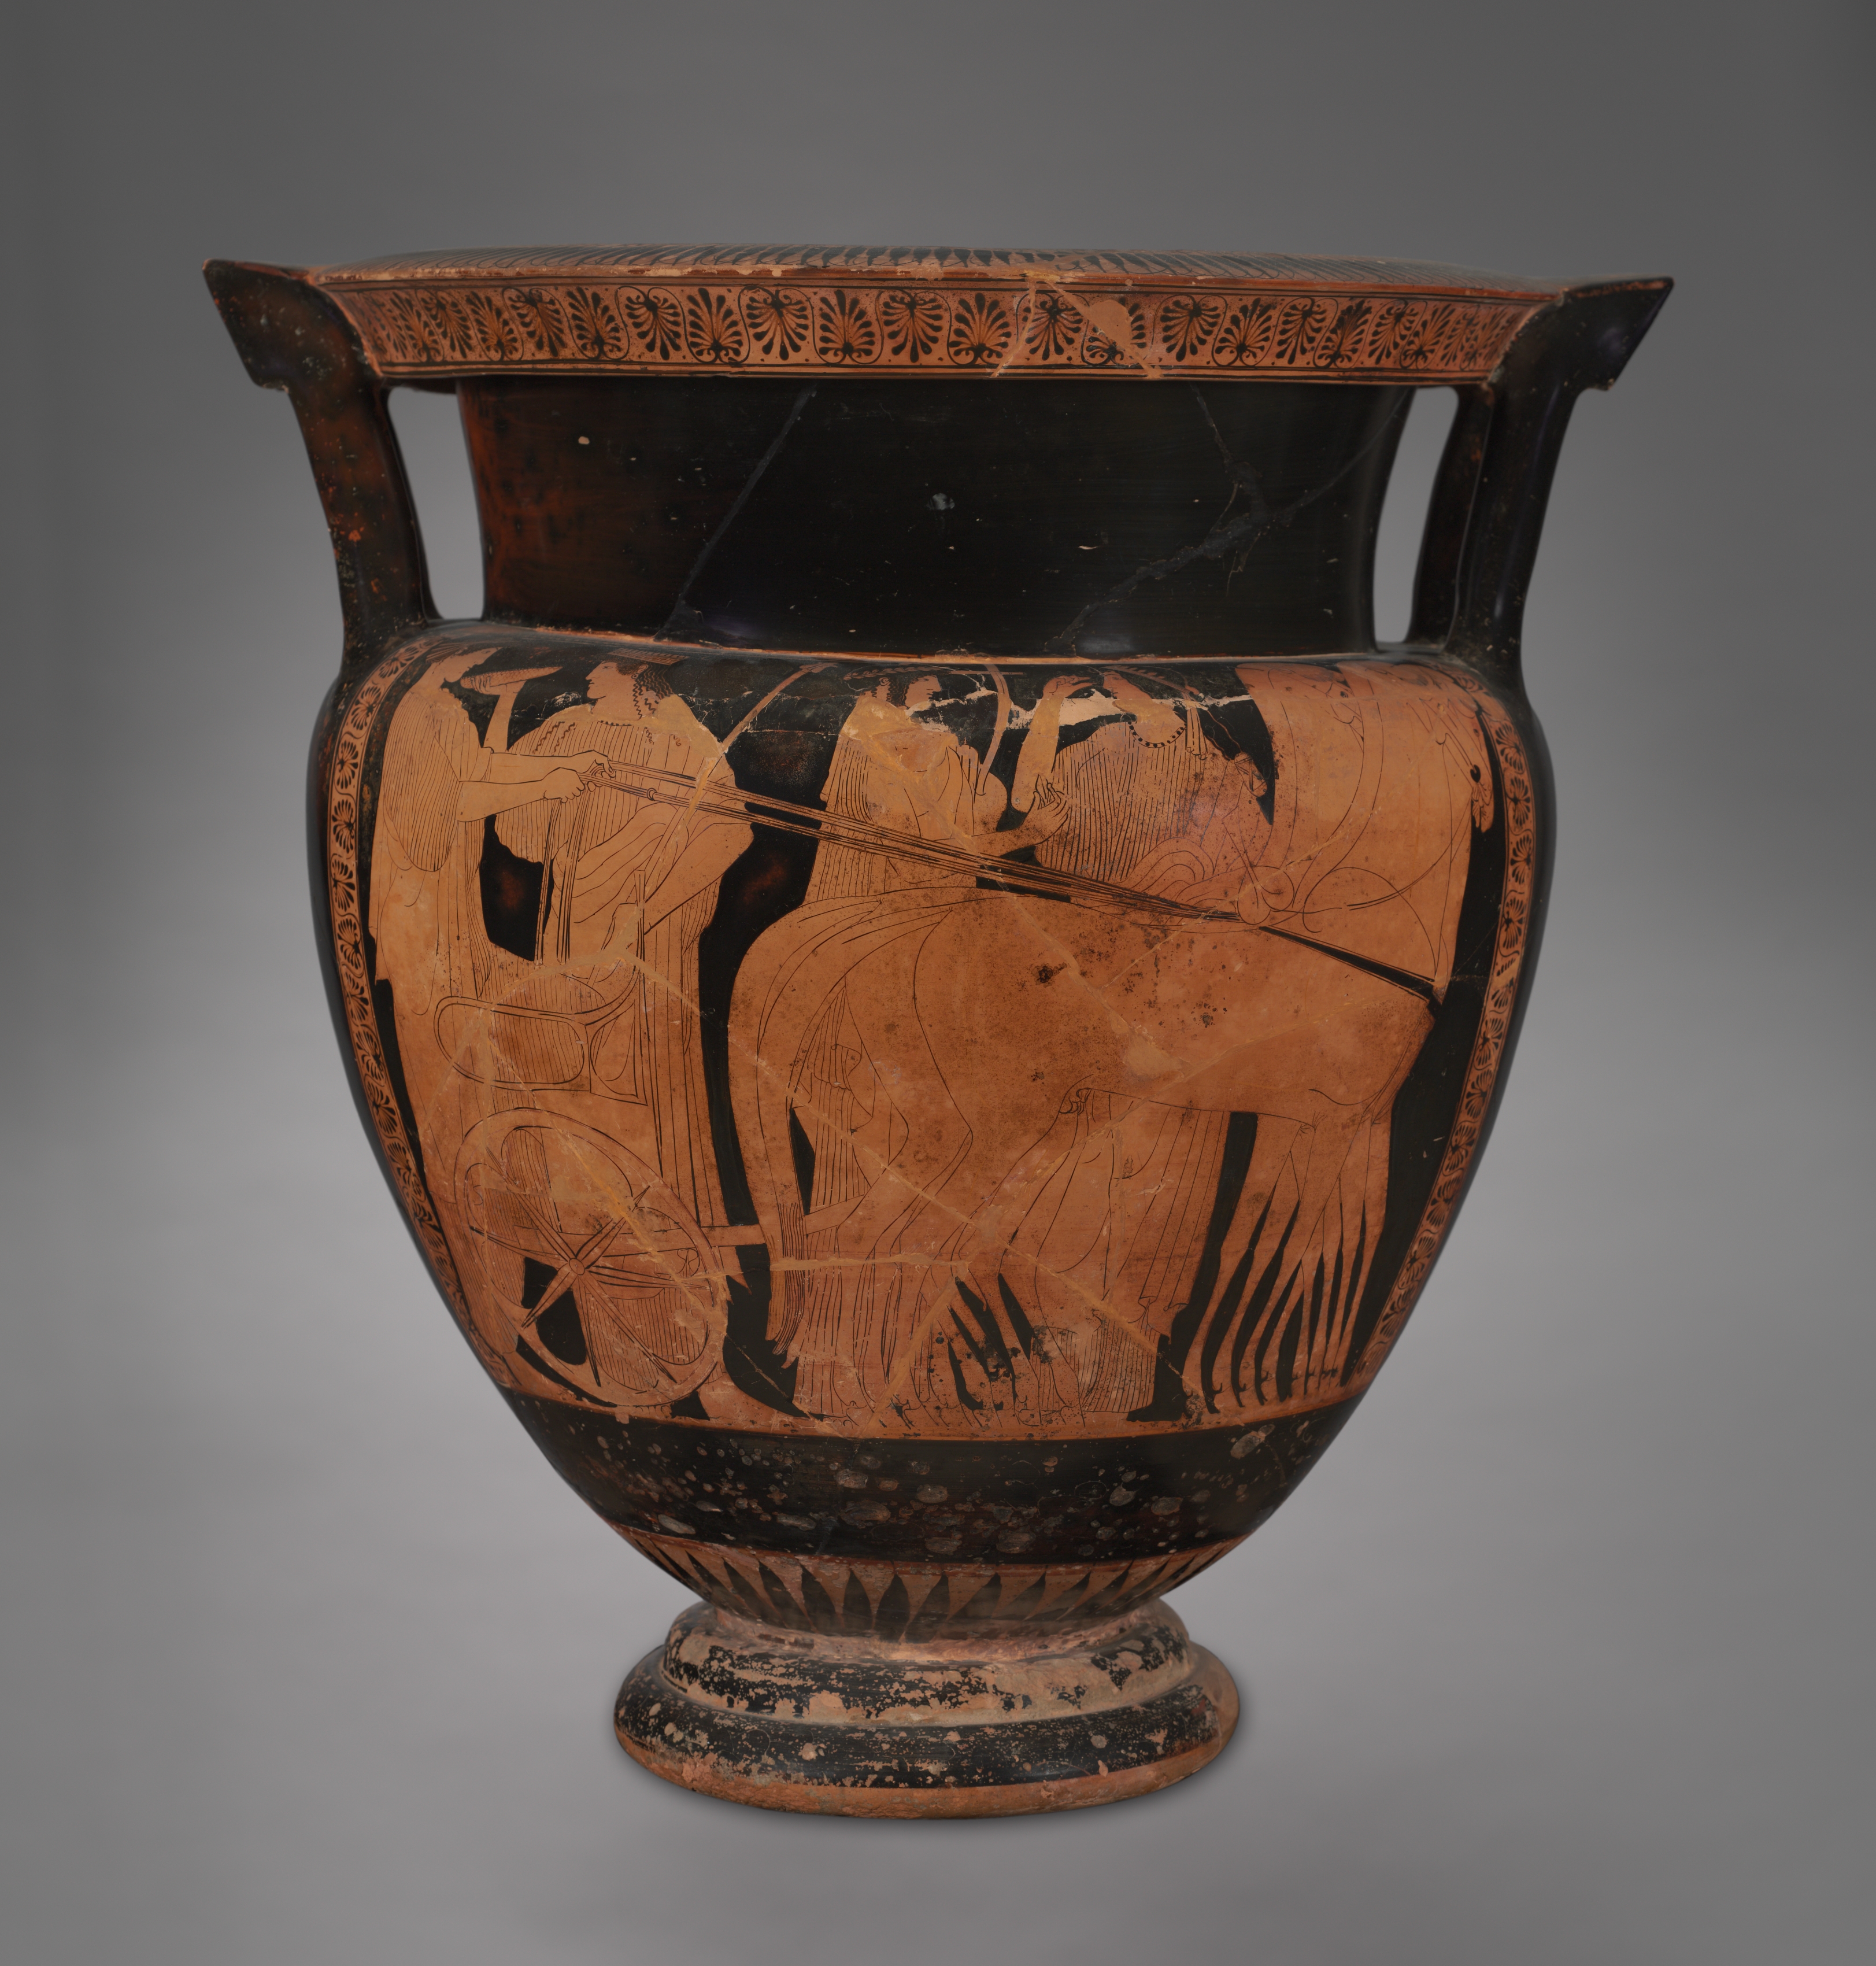 Red-Figure Column Krater (Mixing Vessel): Apollo and Goddesses with Chariot (A); Komos (Revel) (B)